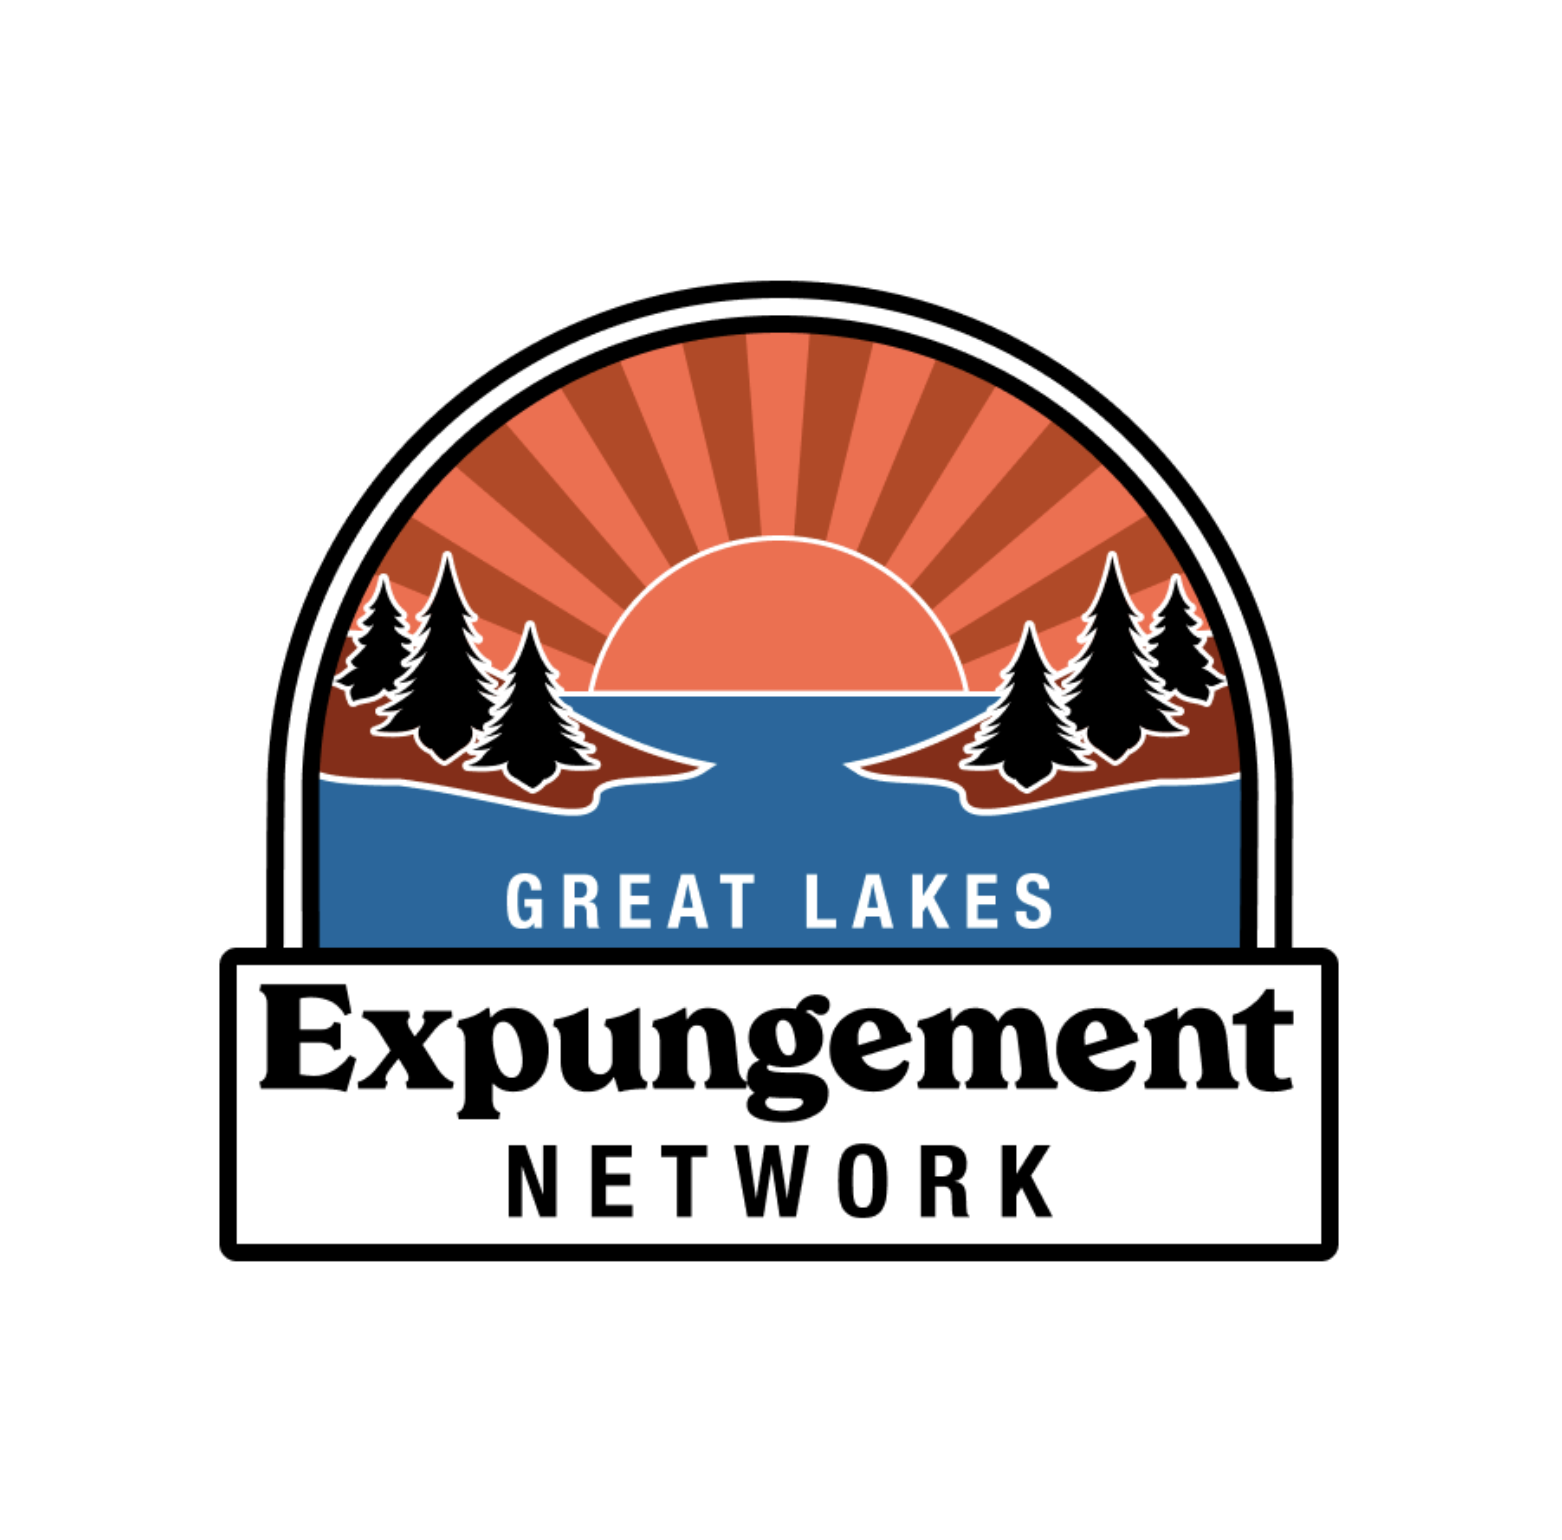 Great Lakes Expungement network logo with river, sunrise, and lake graphic